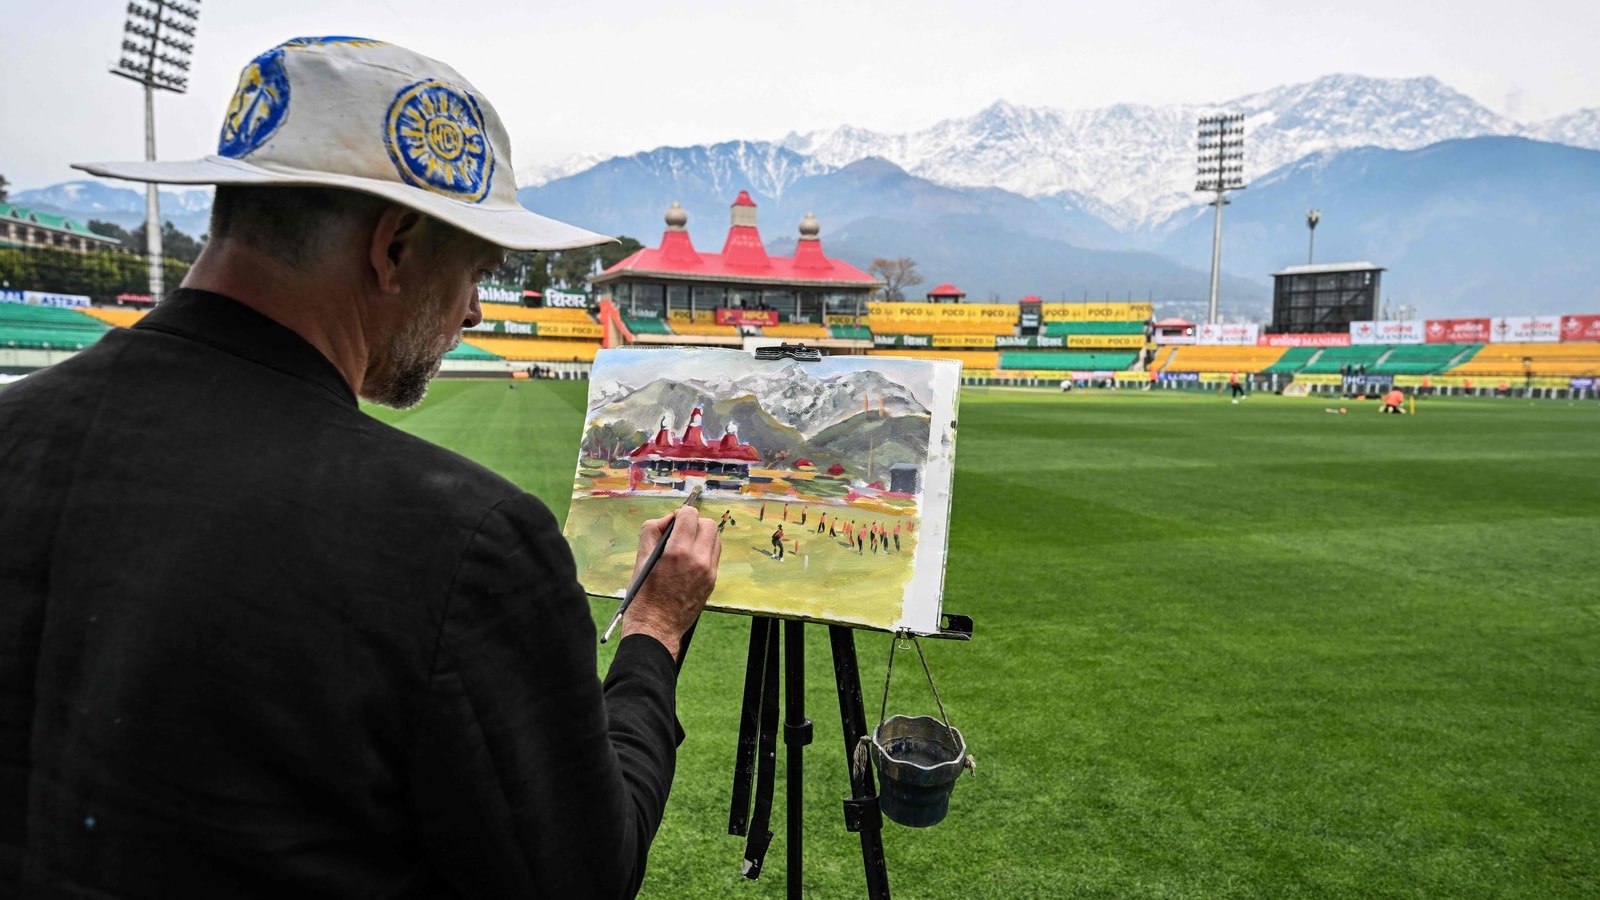 Winter chill, used pitch as anticipation builds for Dharamsala Test between India and England